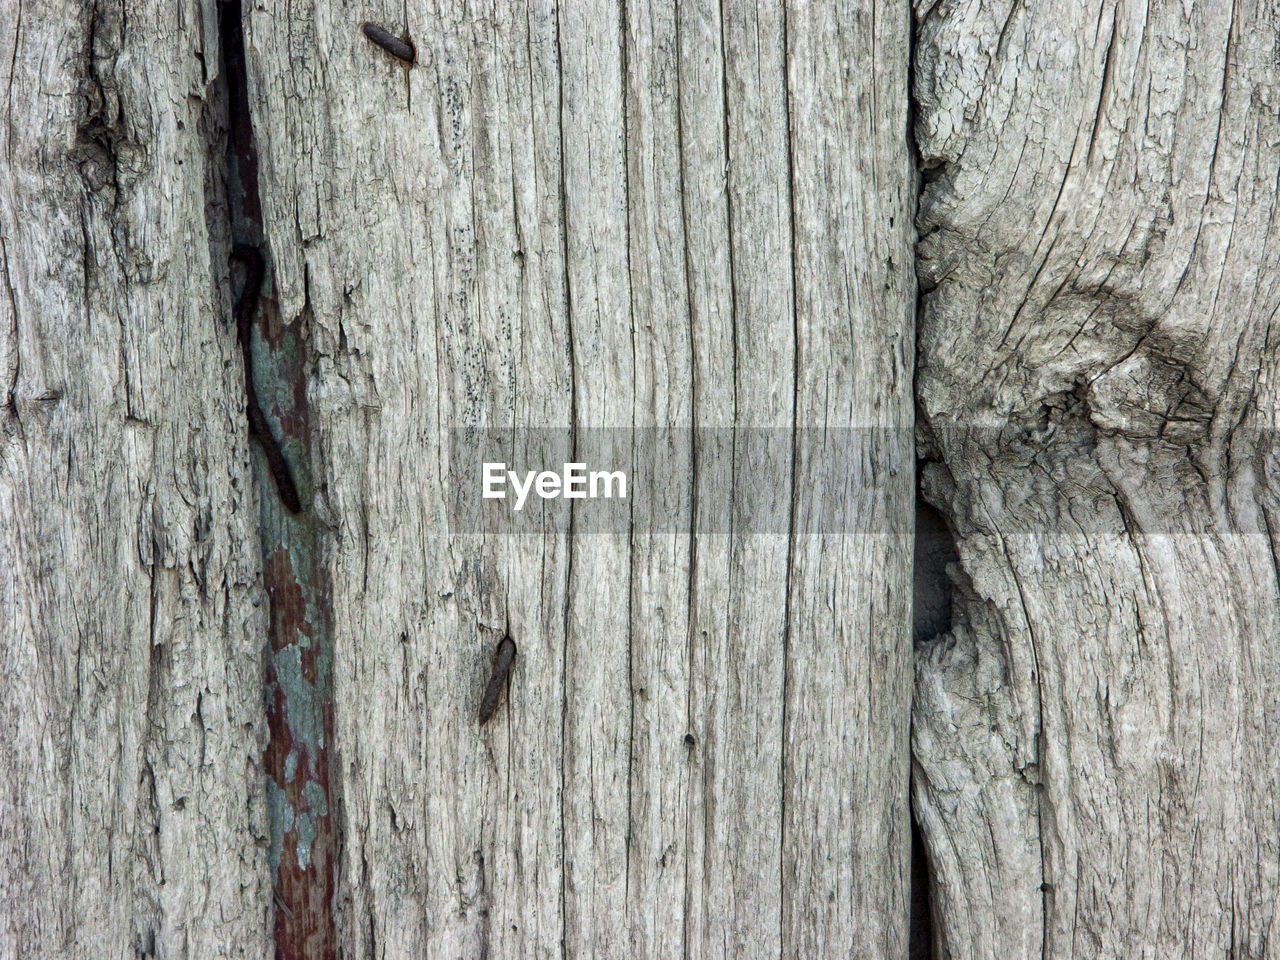 FULL FRAME SHOT OF WEATHERED WOODEN TREE TRUNK